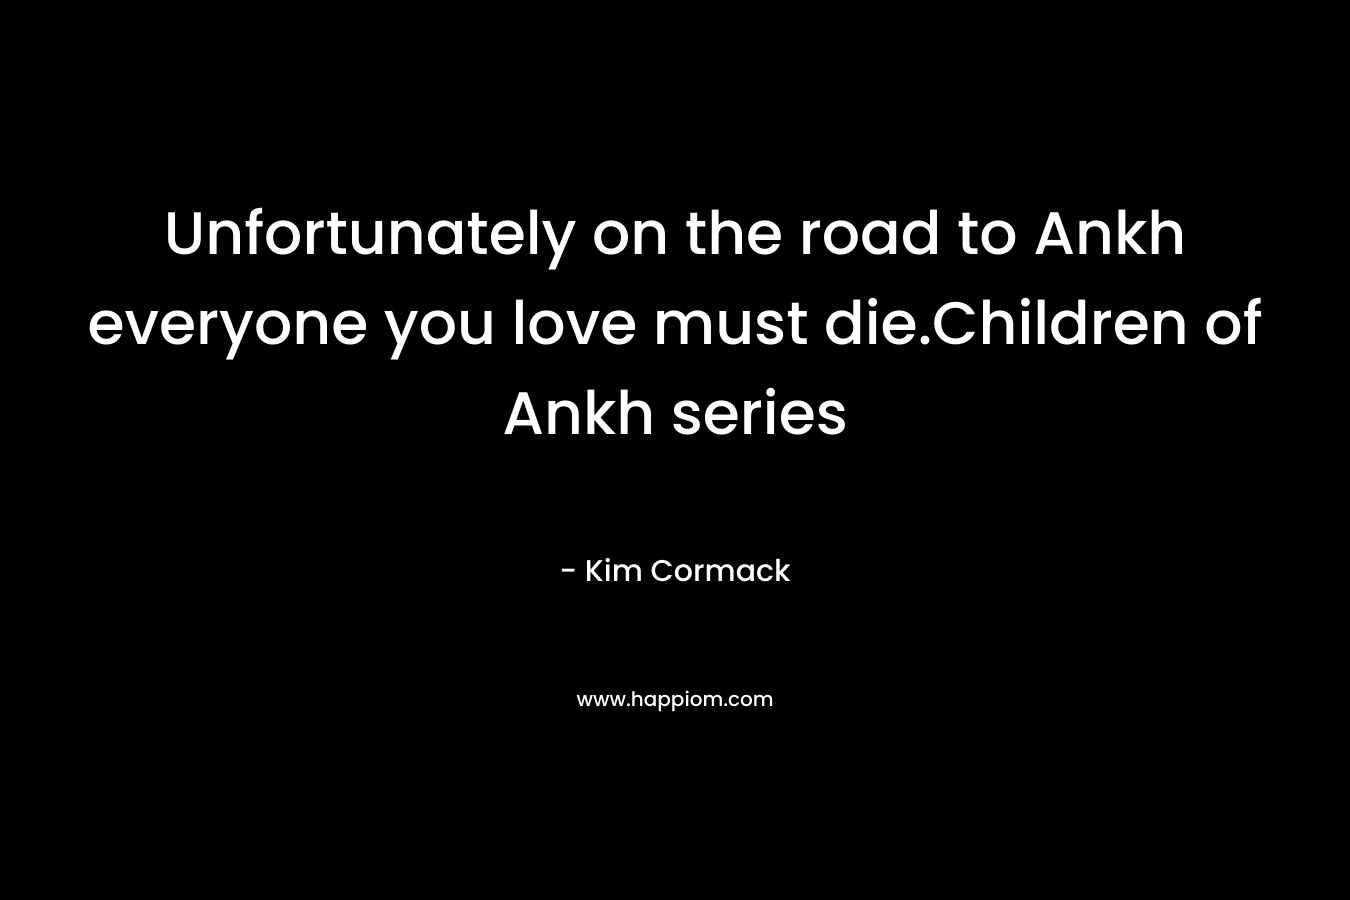 Unfortunately on the road to Ankh everyone you love must die.Children of Ankh series – Kim Cormack